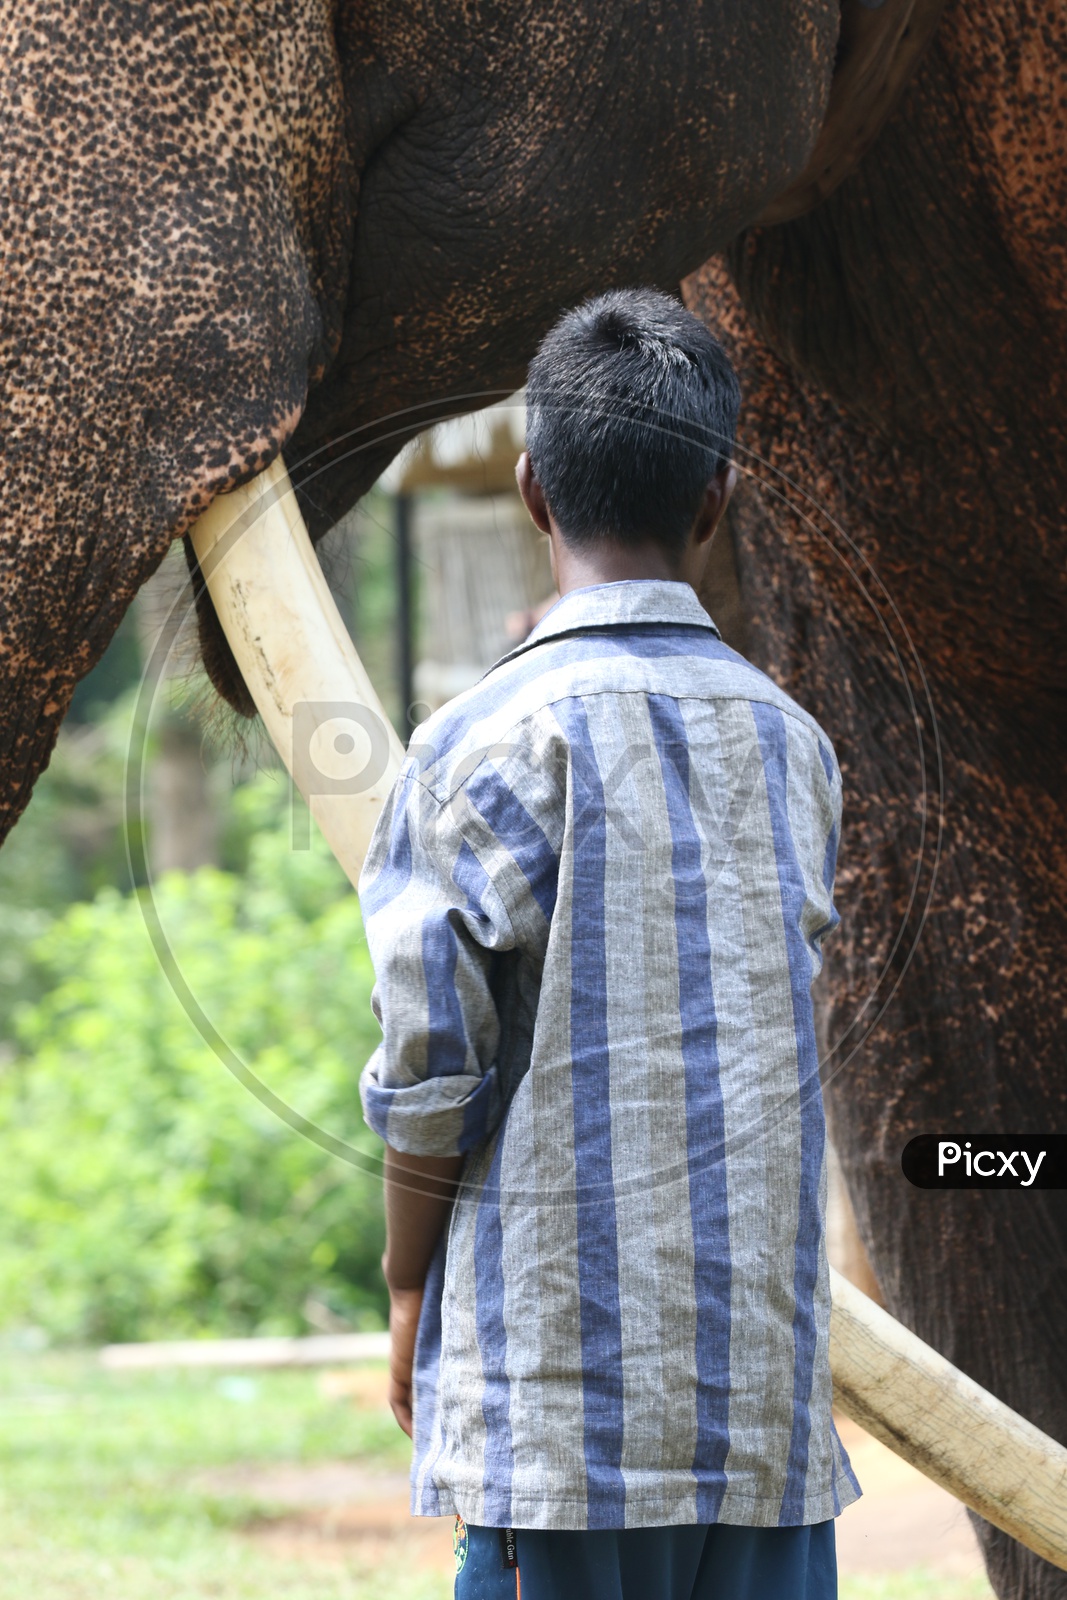 A young boy looking at Elephant